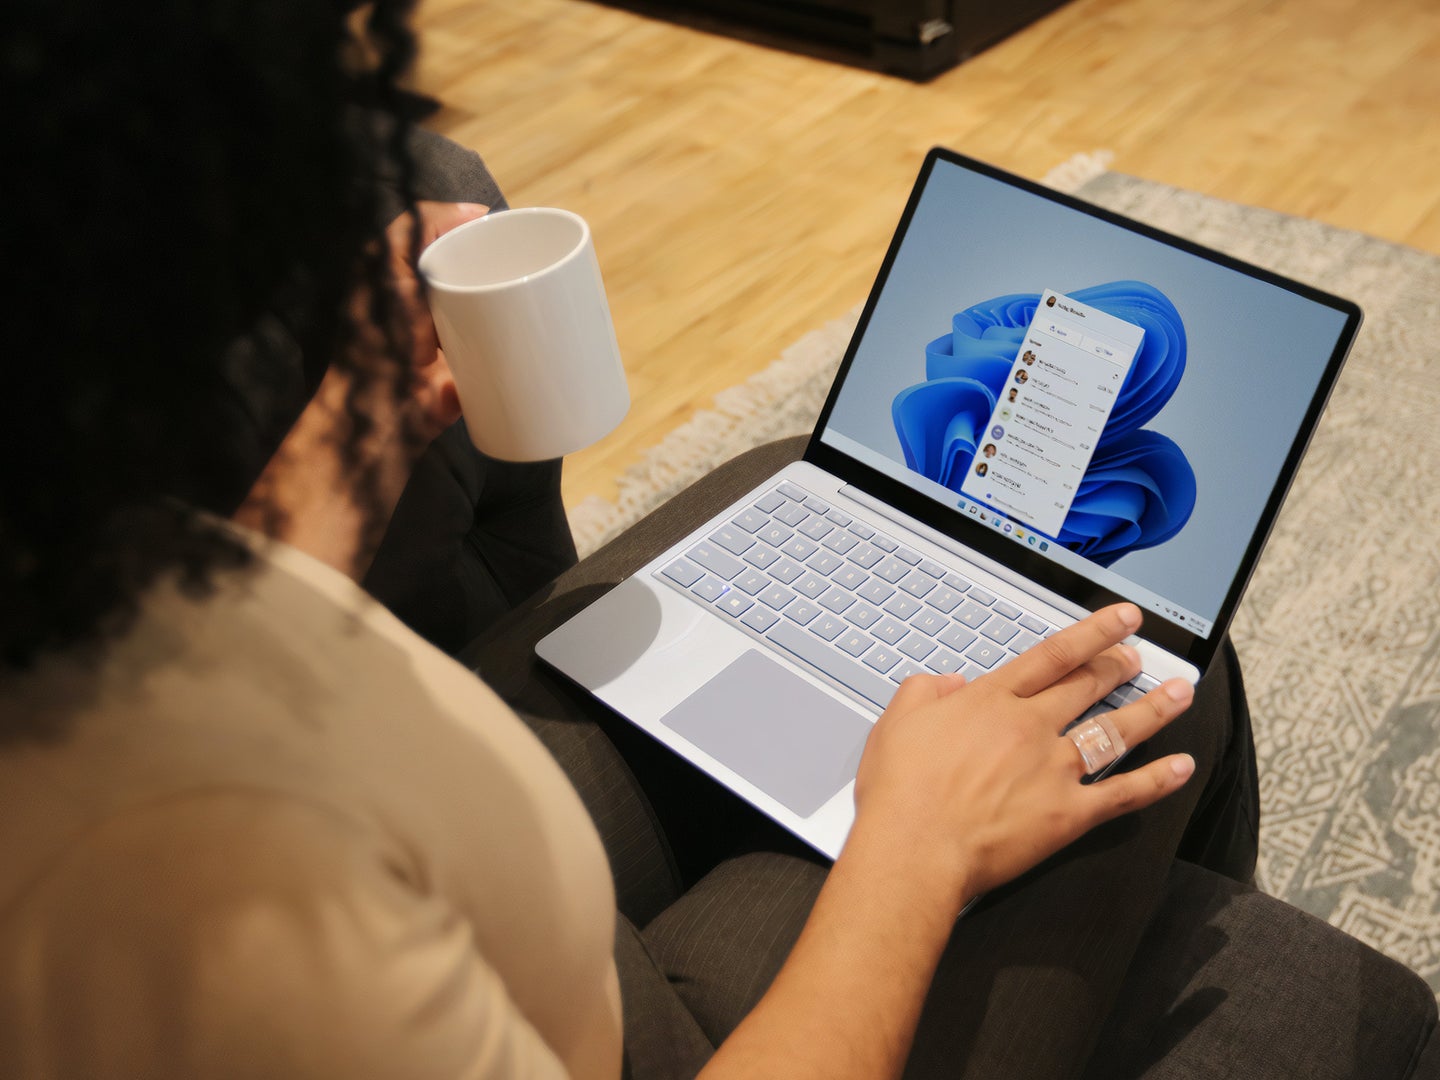 Black person sitting with surface laptop their lap while holding a mug